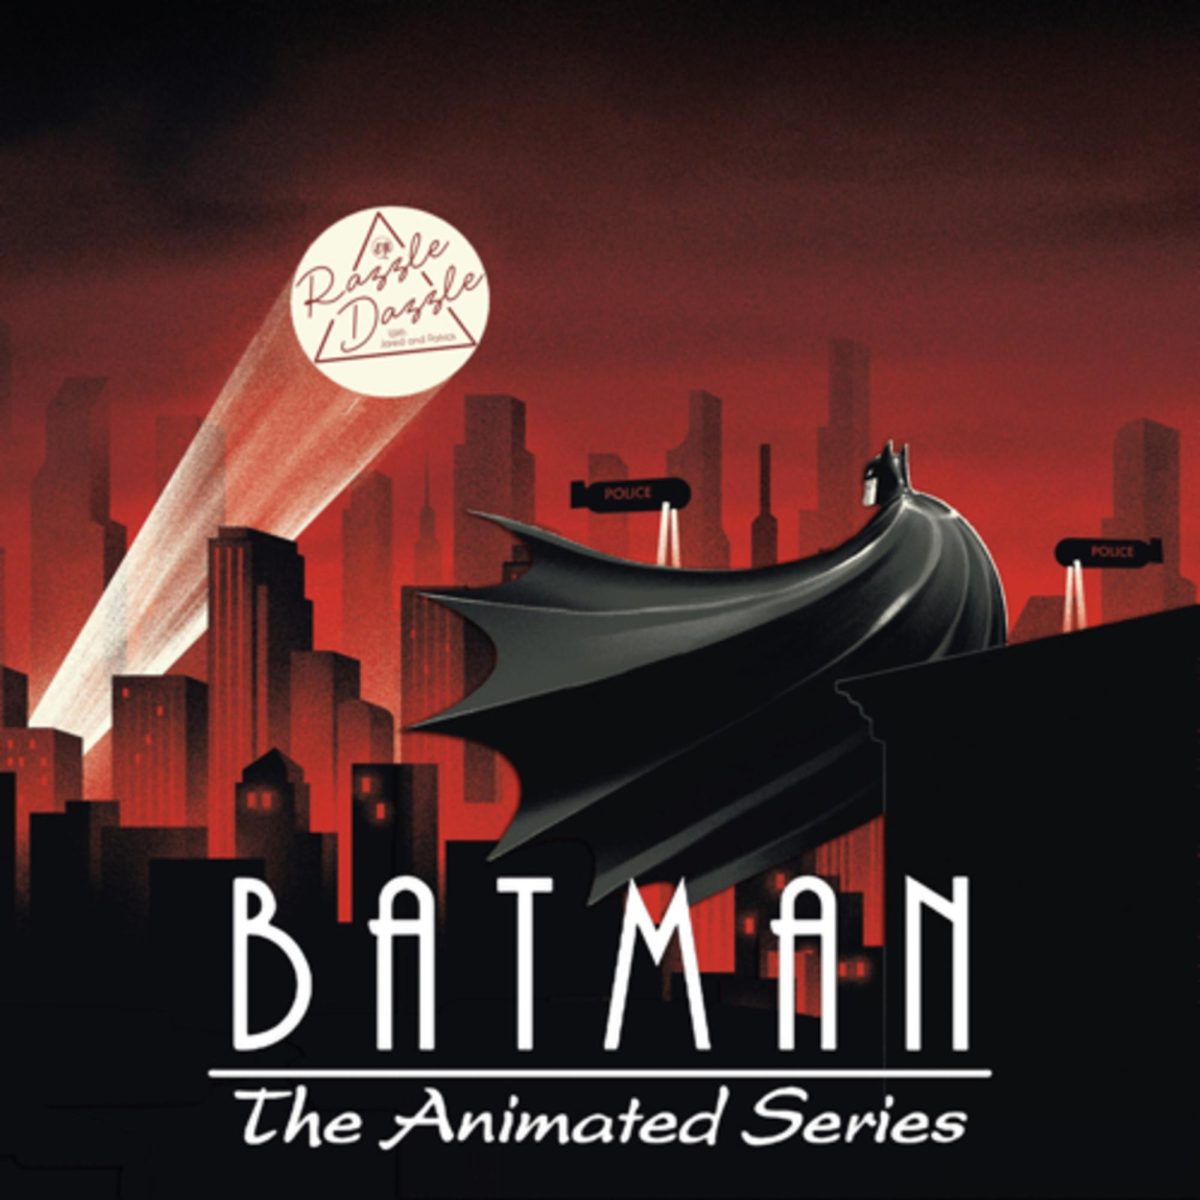 Batman+The+Animated+Series+feat.+Richard+Chin+Quee